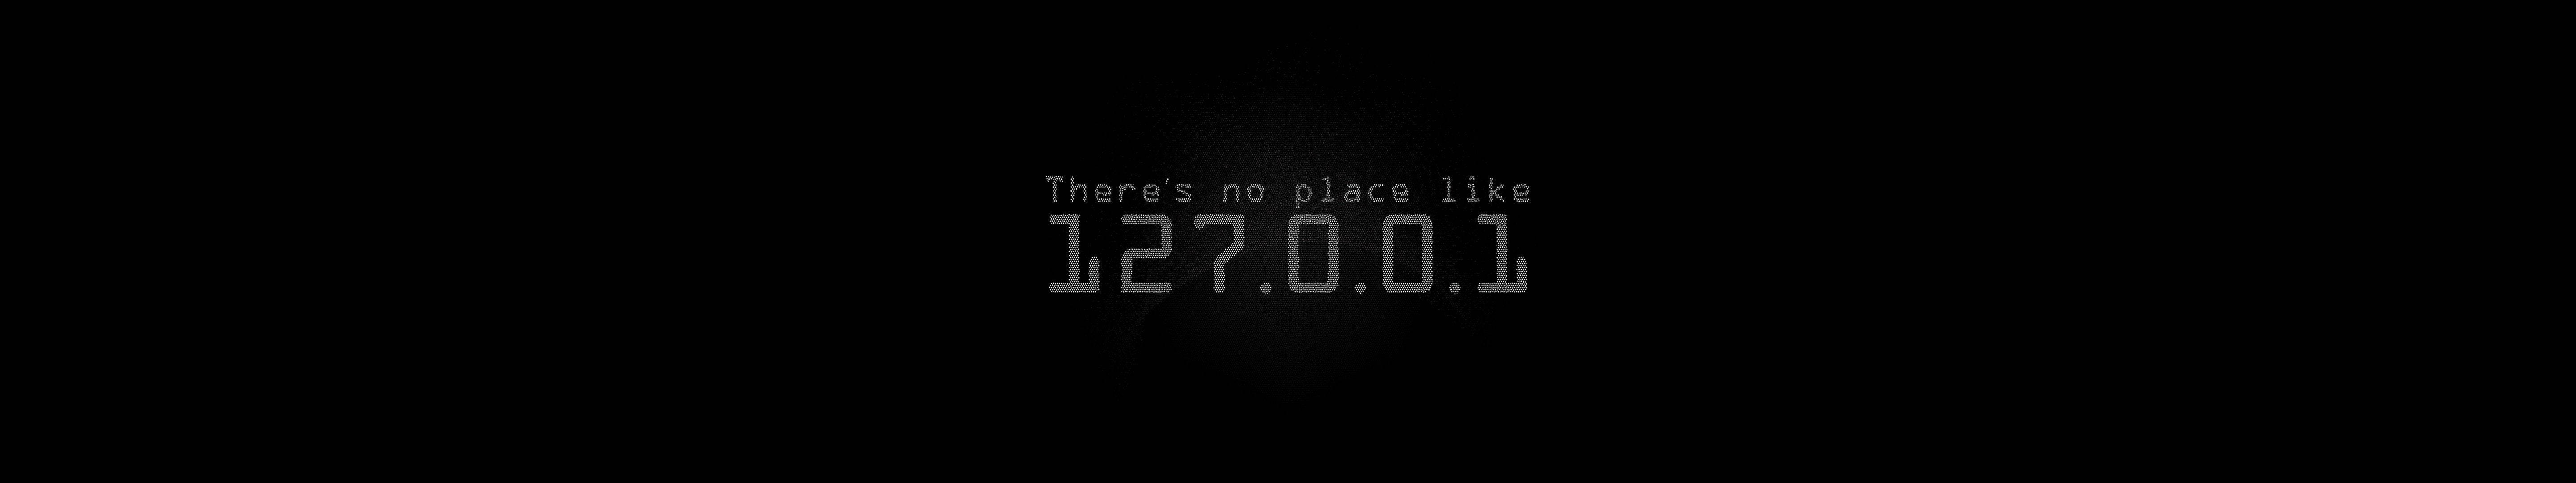 There's No Place Like 127.0.0.1 Meme Background